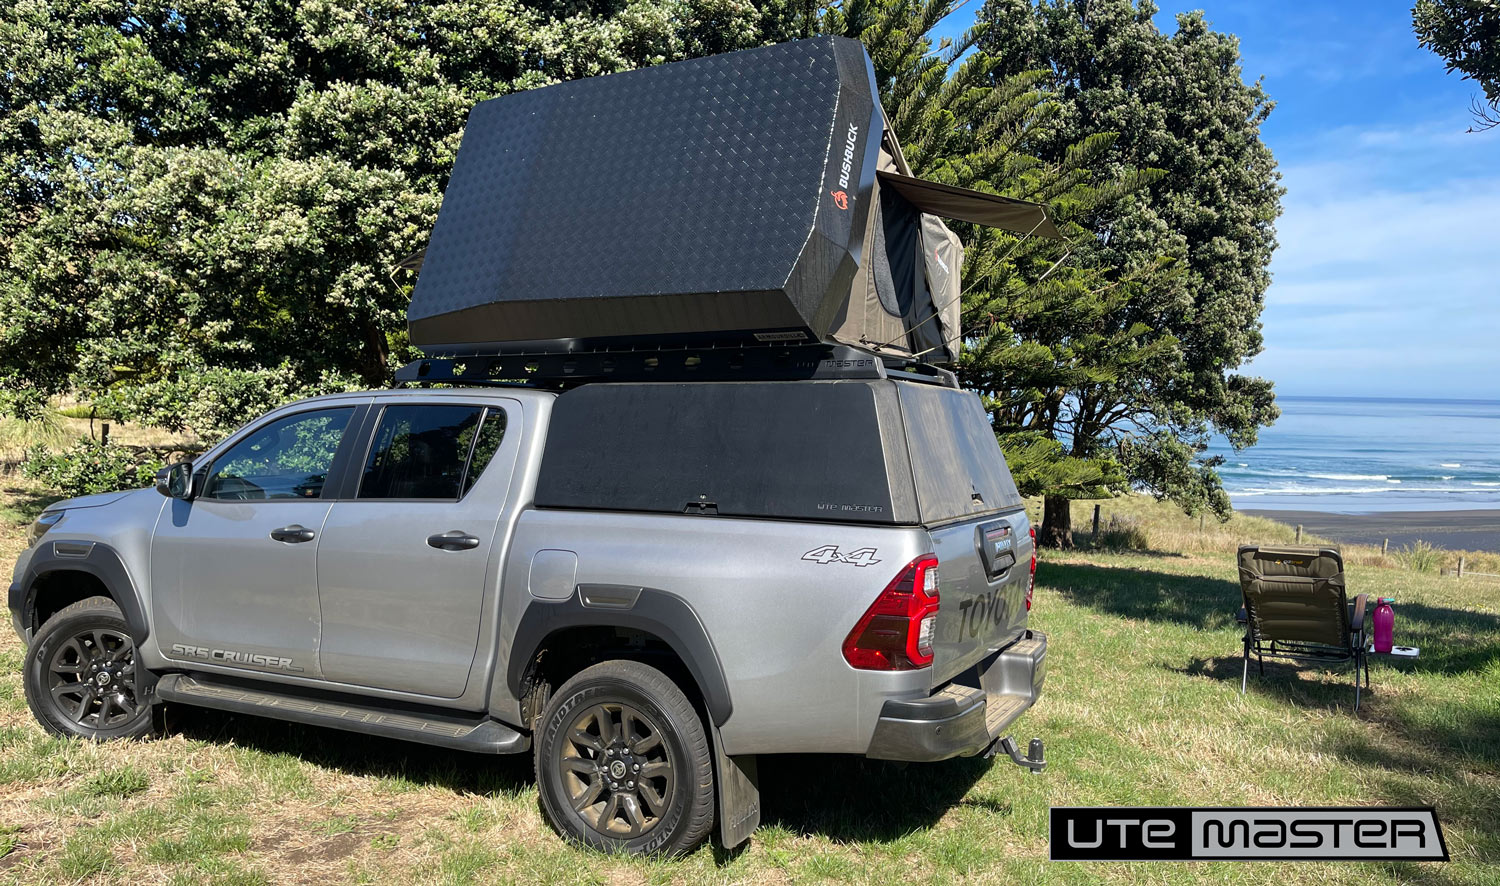 Utemaster Centurion Ute Canopy to suit Toyota Hilux Overlanding Camping AUS - Cantilever Roof Rack with Roof Top Tent Bushbuck